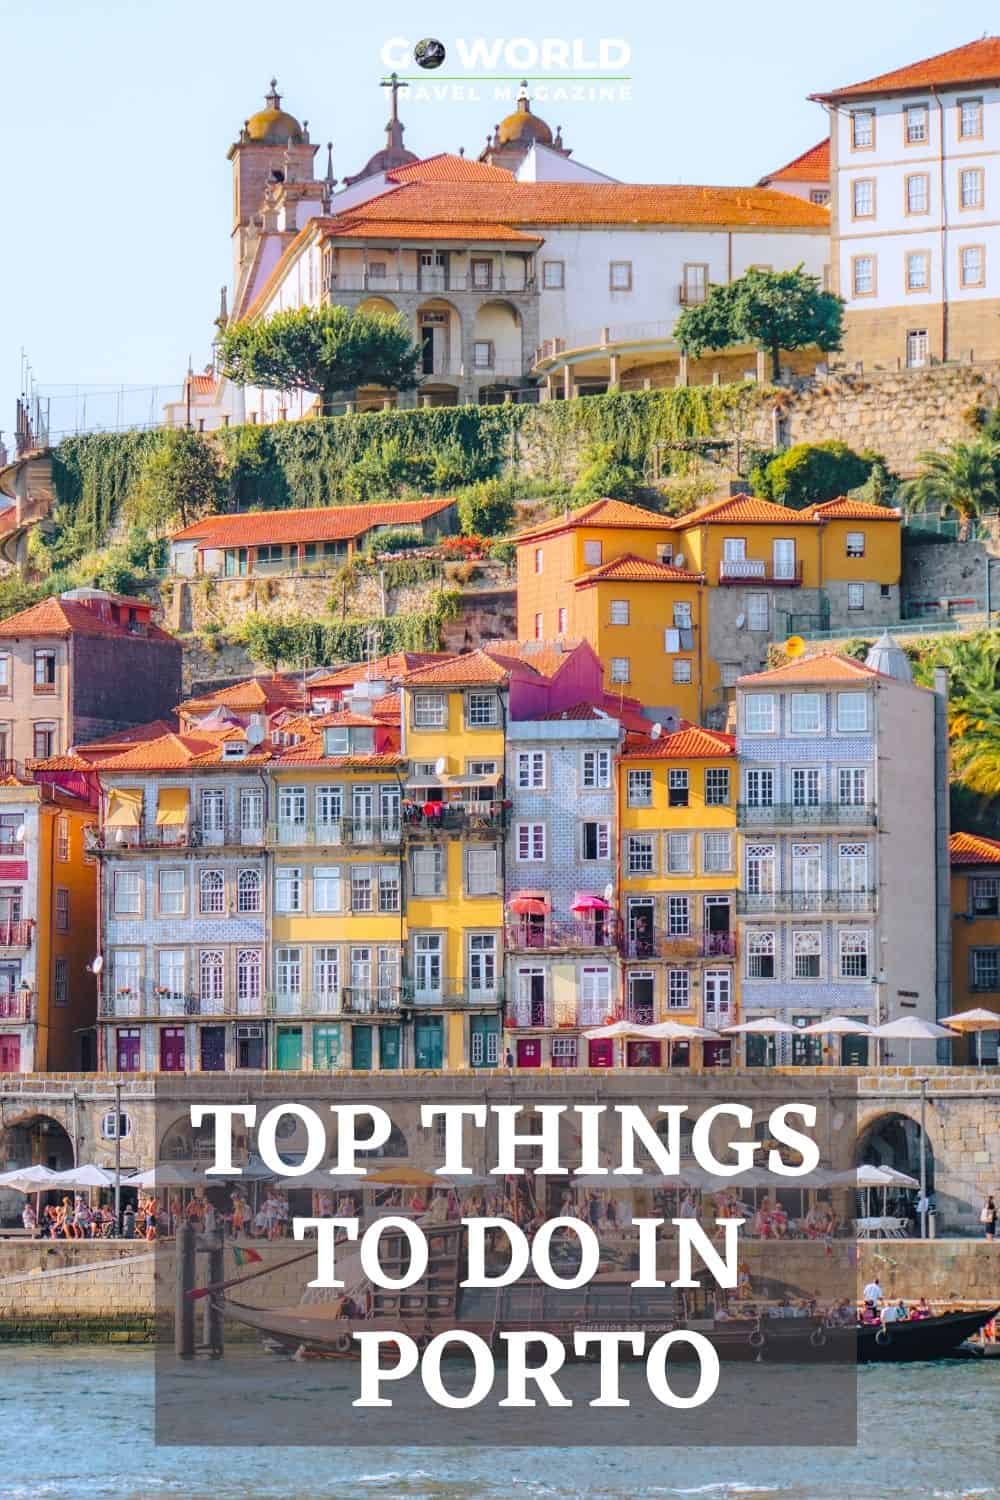 Check out these top 10 things to do in Porto. You will fall in love with this charming riverside city, an alternative to popular Lisbon. #Portugal #Porto